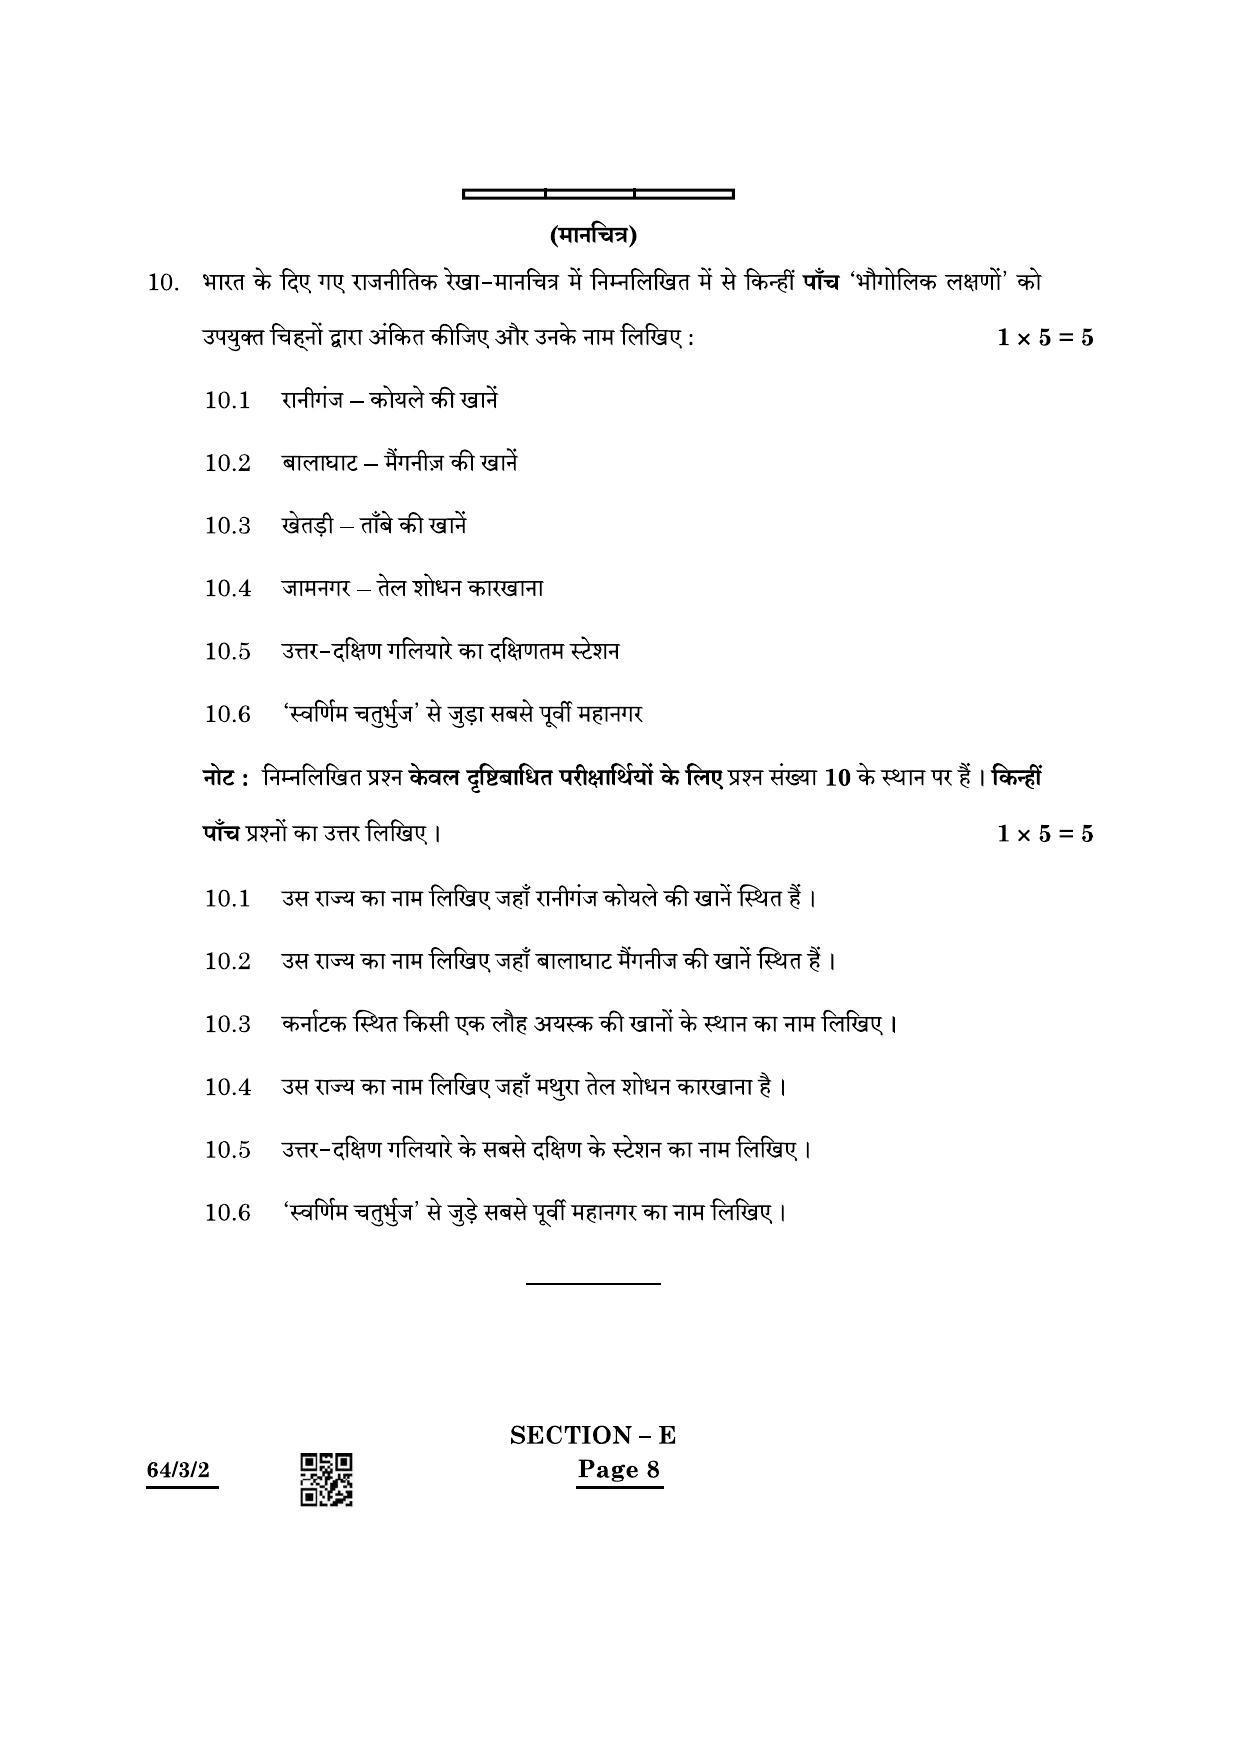 CBSE Class 12 64-3-2 Geography 2022 Question Paper - Page 8